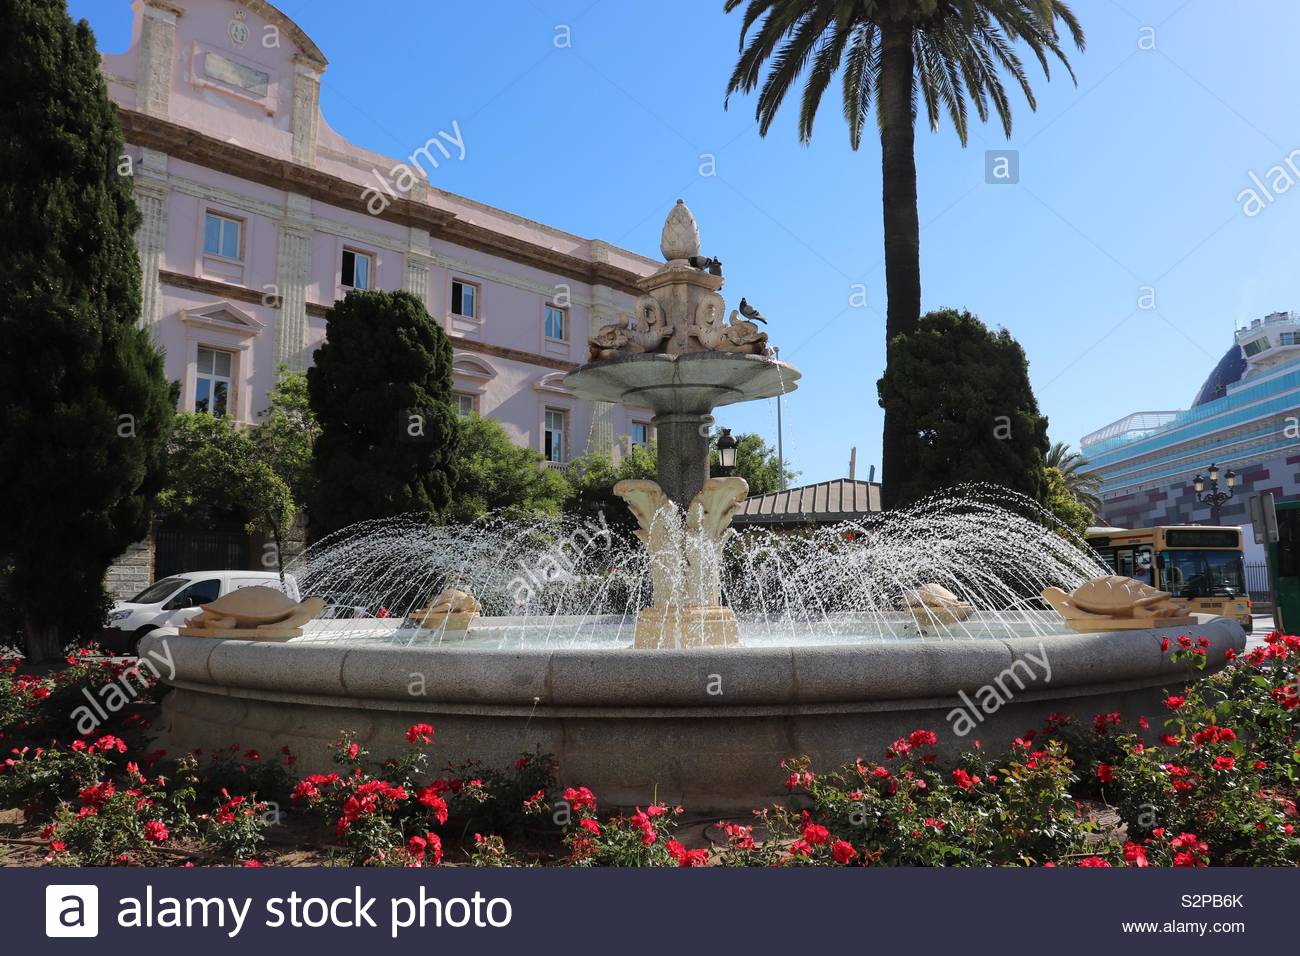 Outdoor fountain with ornamental turtles Stock Photo